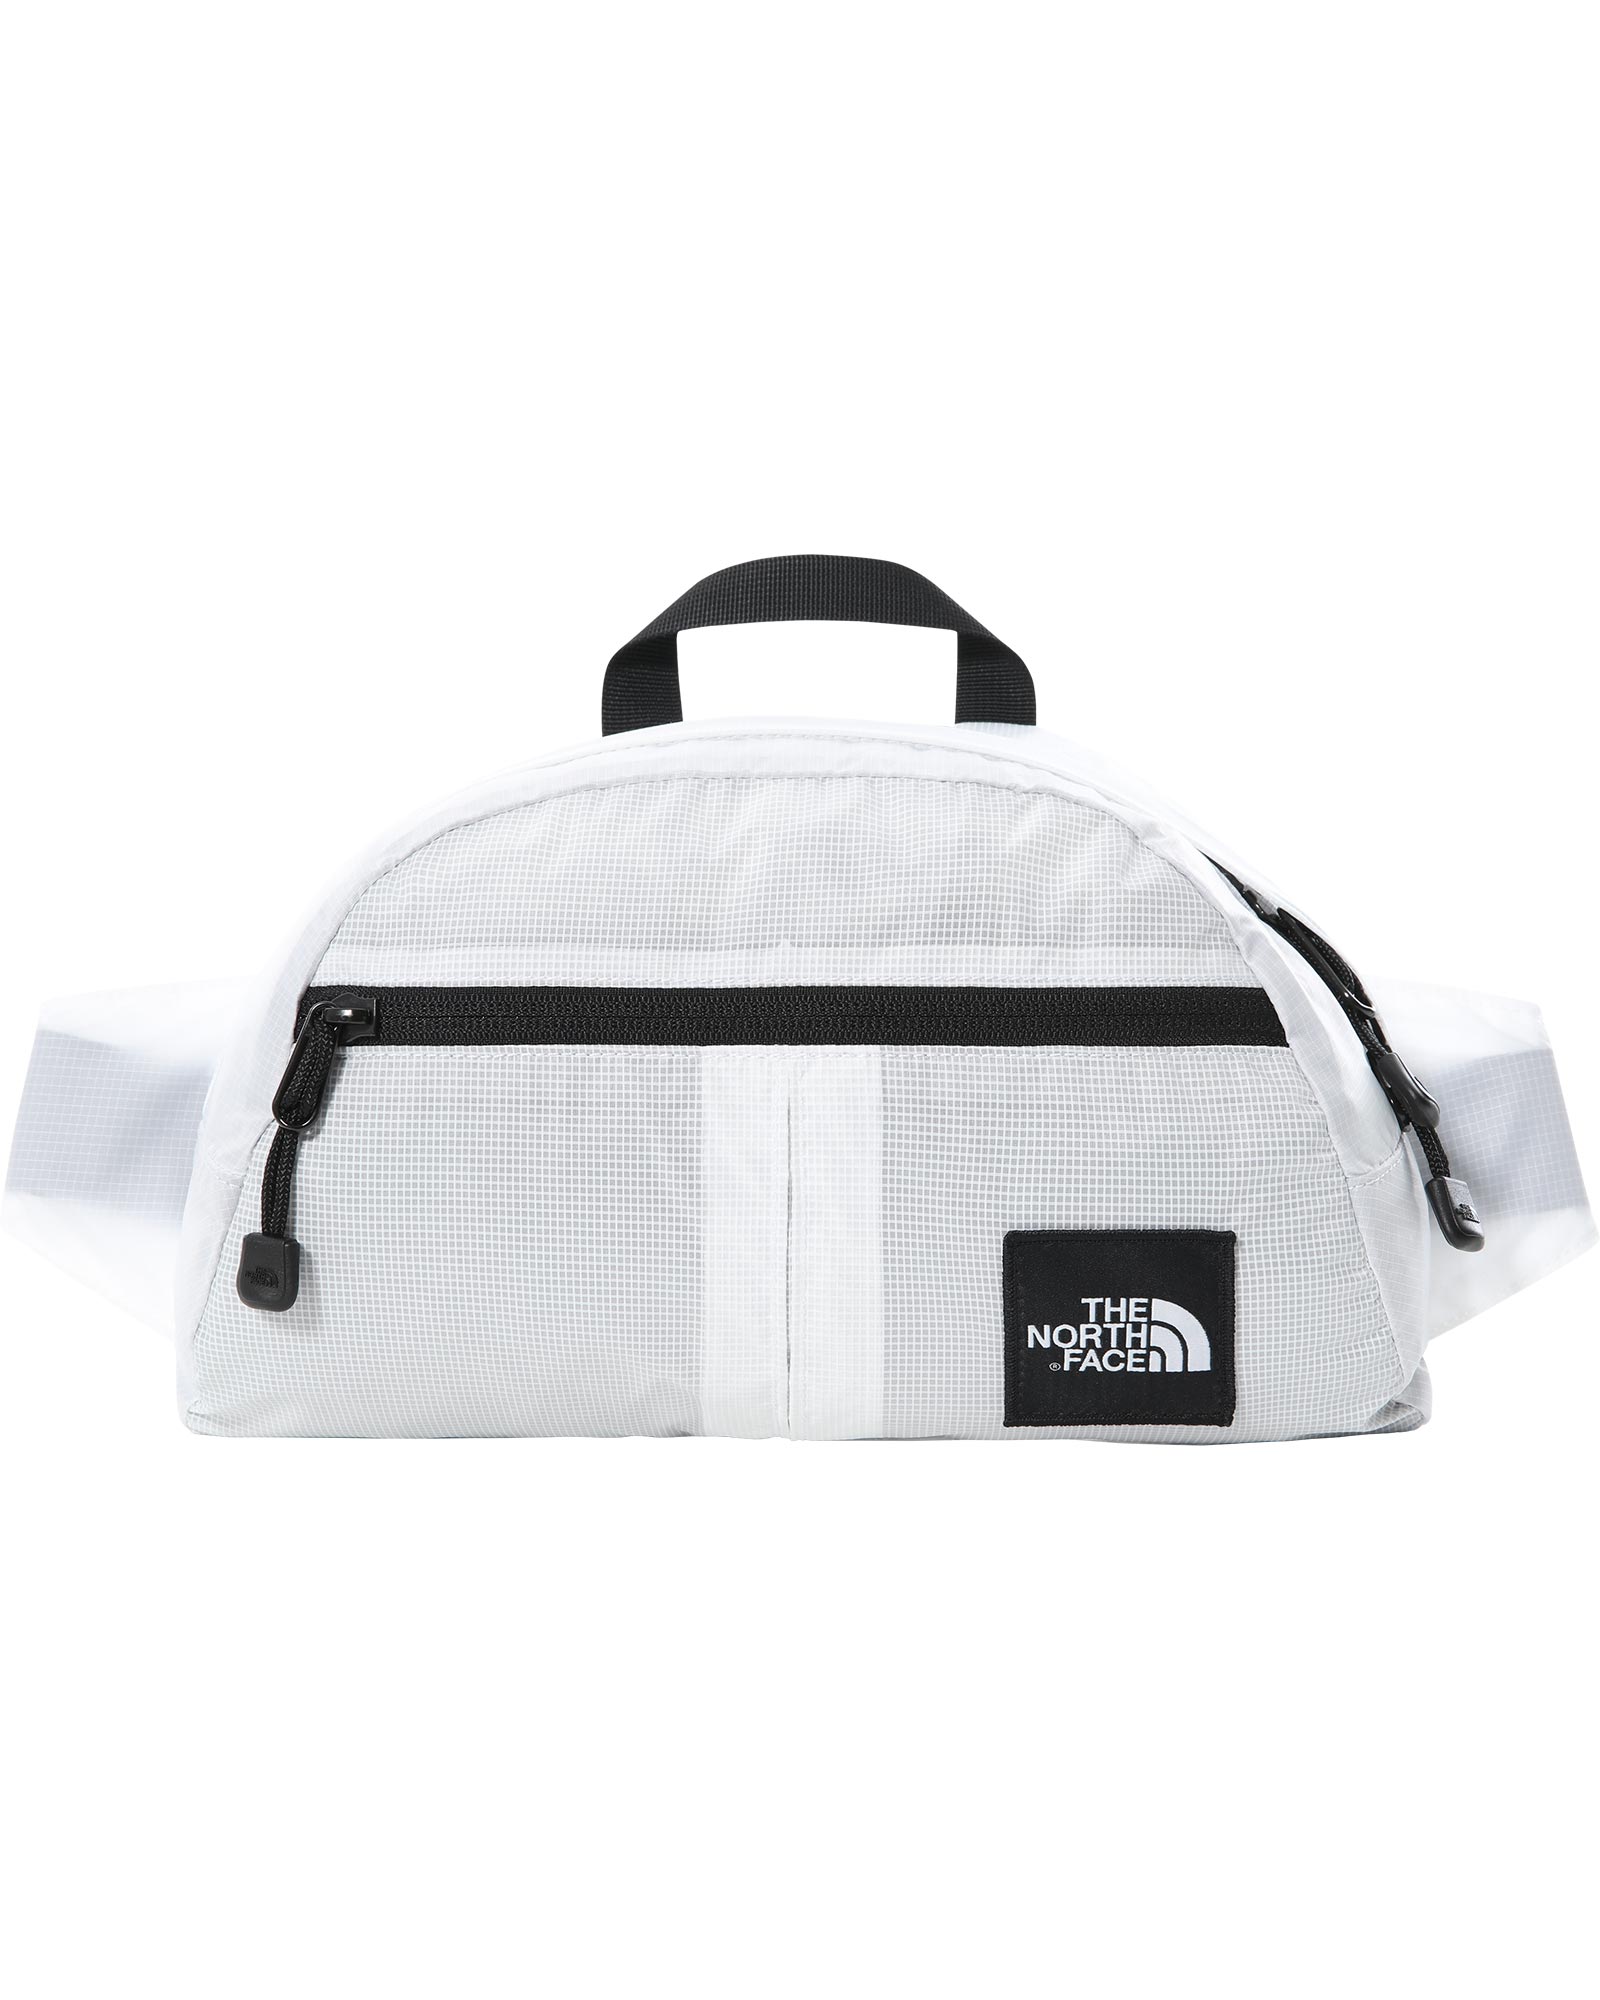 The North Face Flyweight Lumbar Pack - TNF White/TNF Black